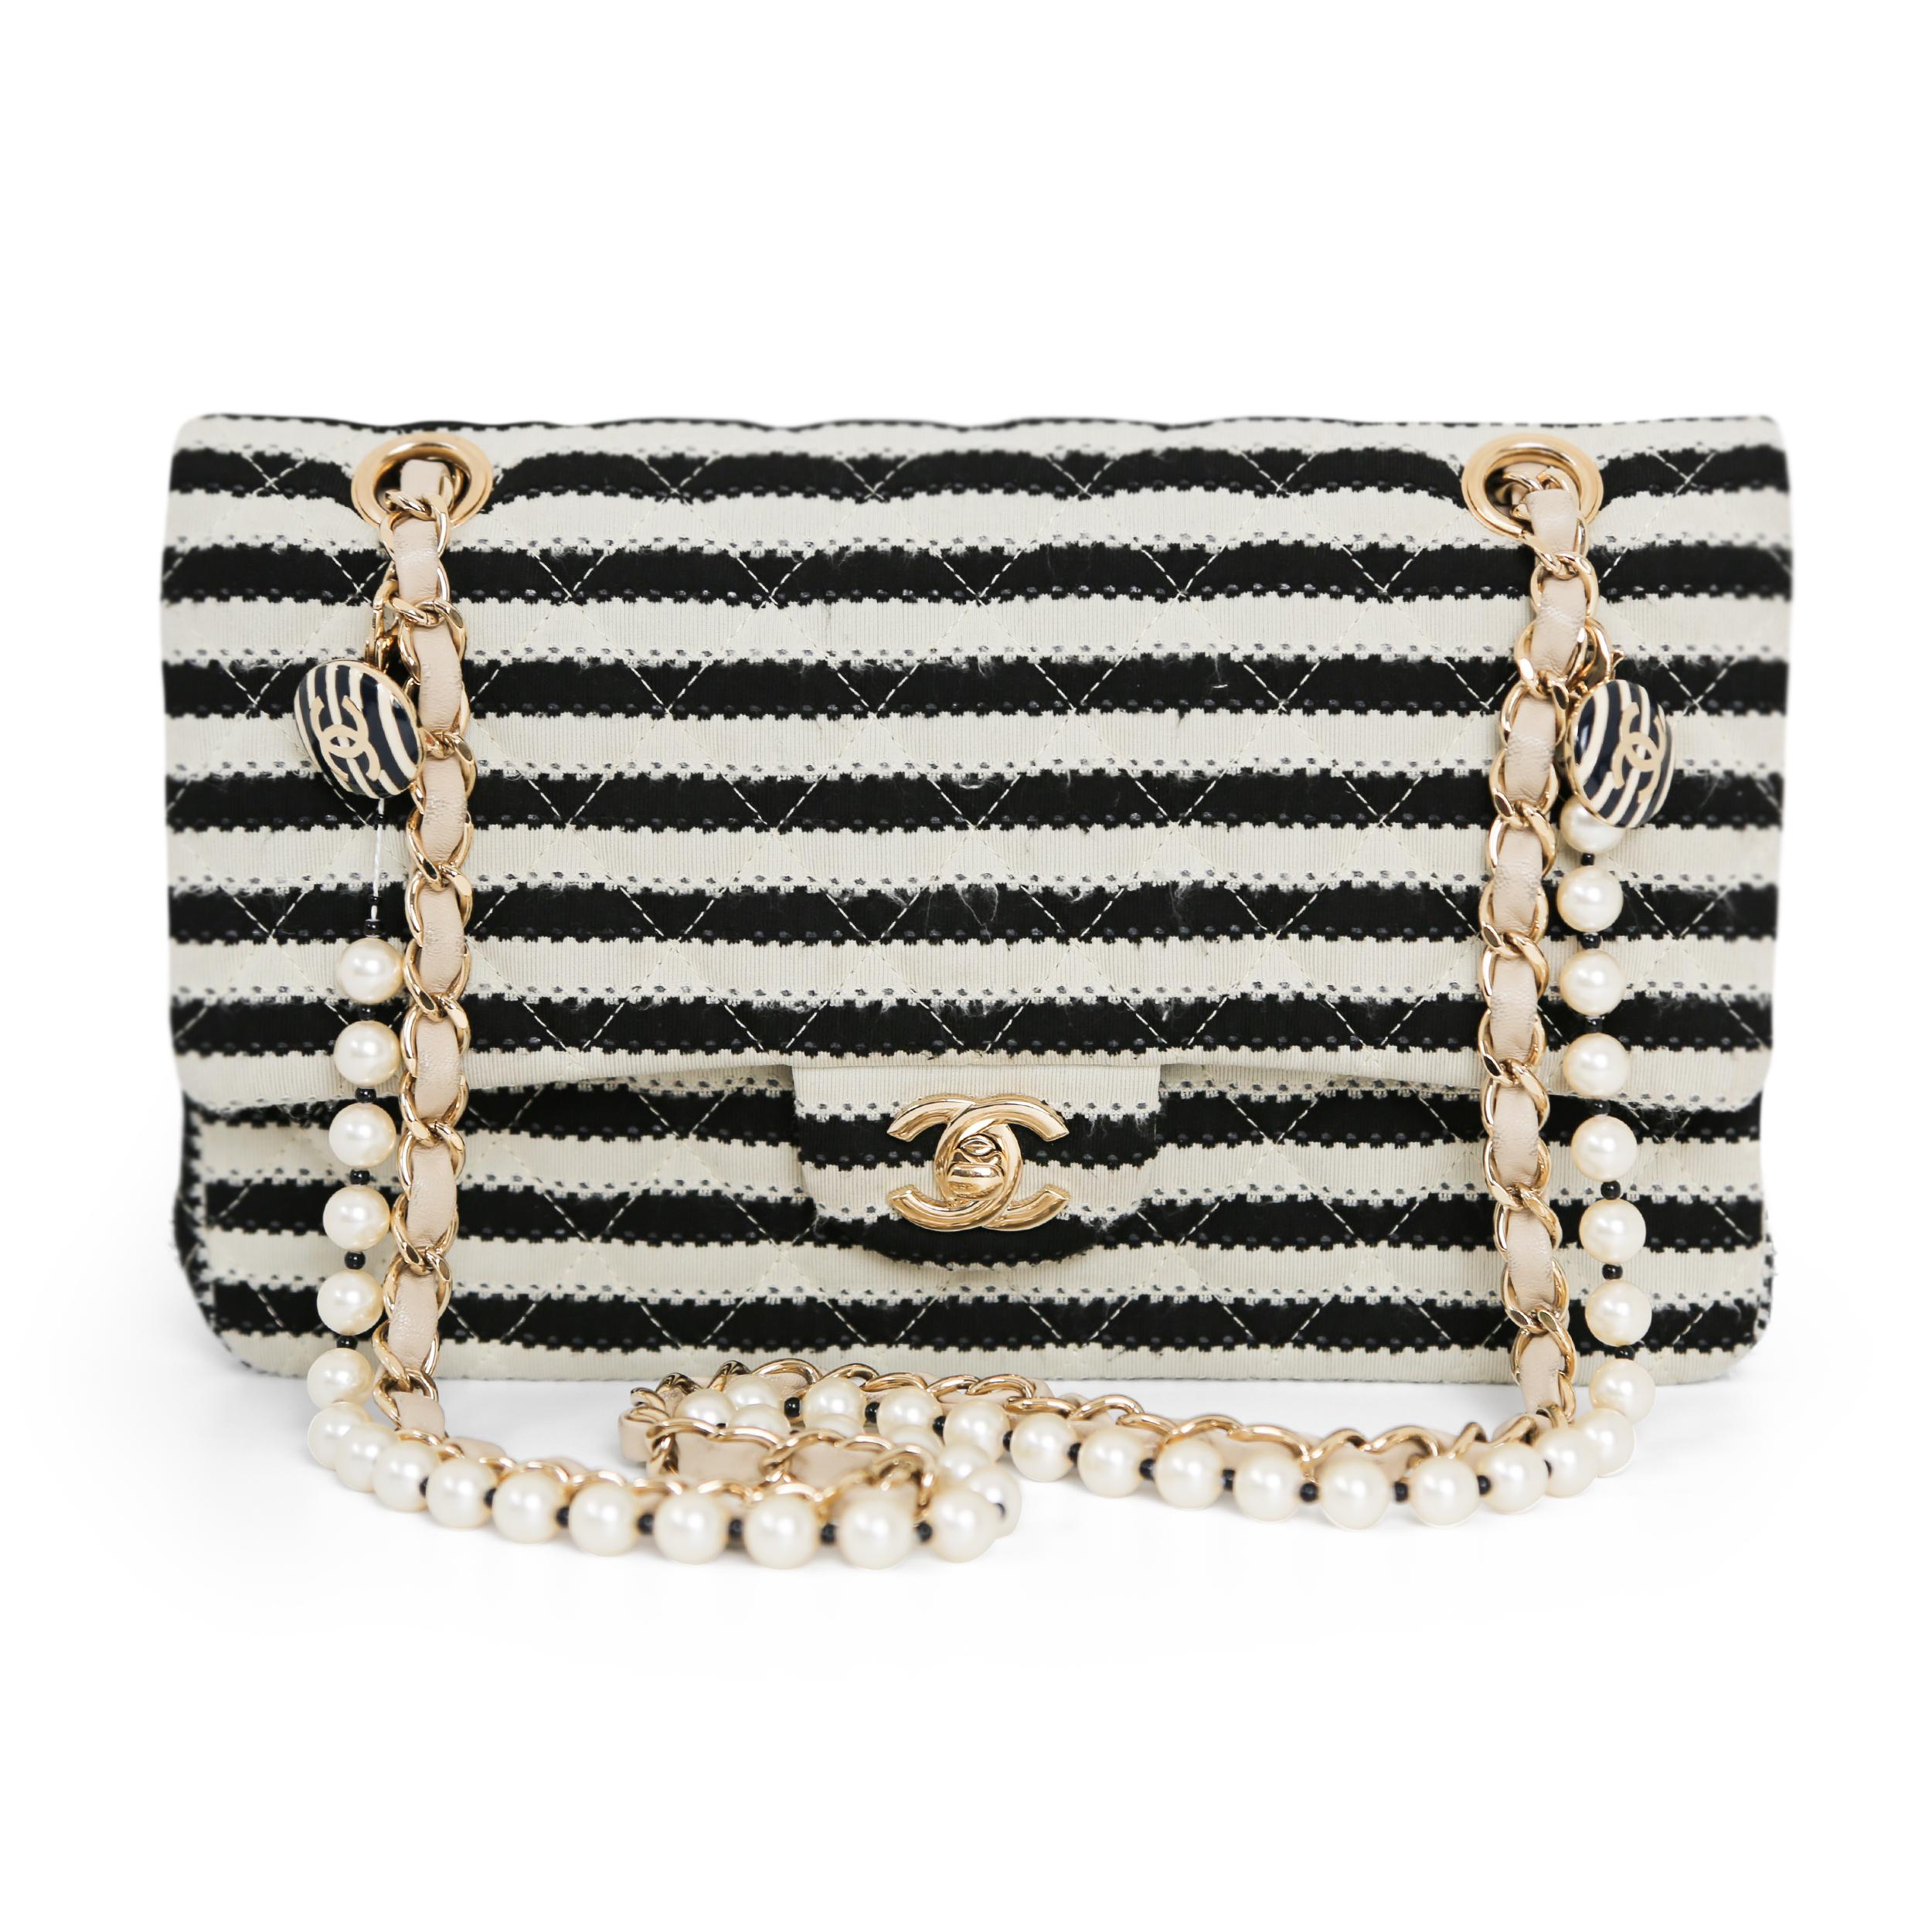 Chanel Coco Sailor Black and Cream Medium Double Flap Bag 2014 For Sale 1